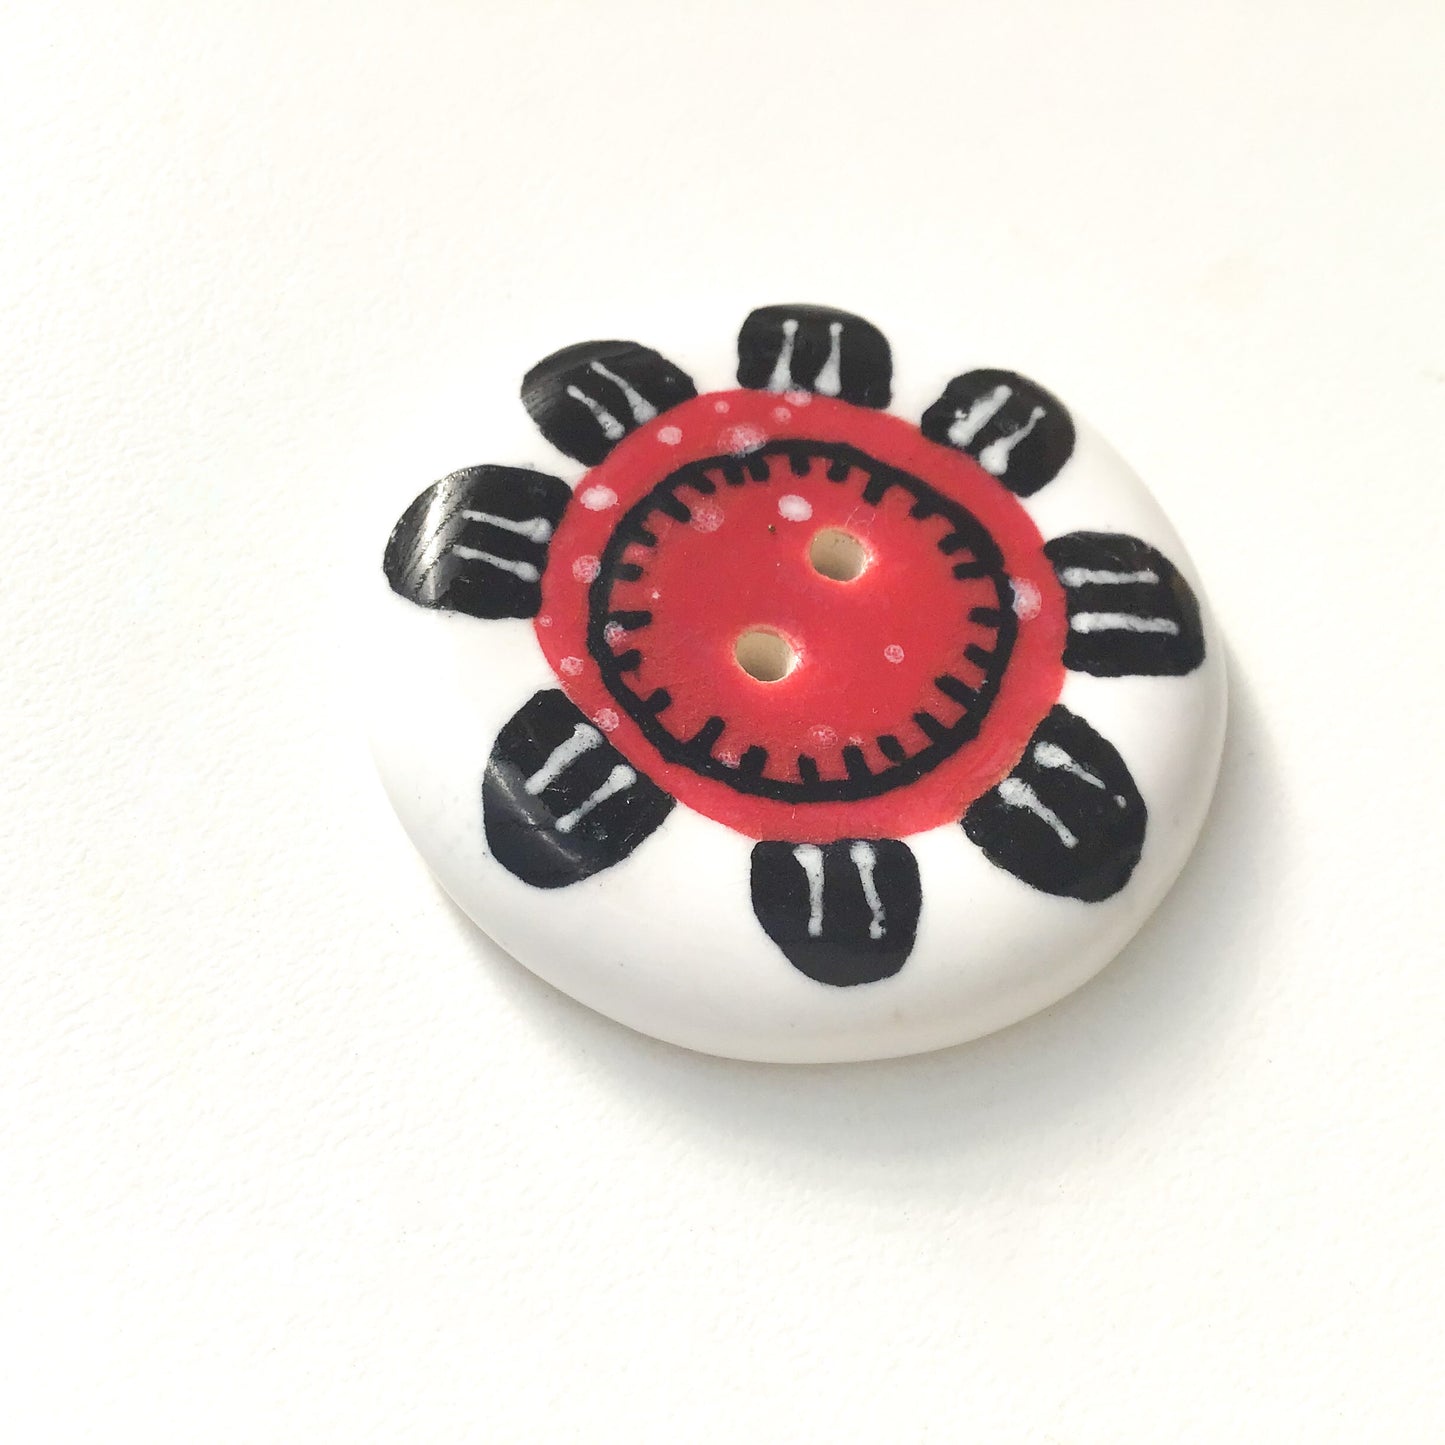 Playful Flower Button -Red & Black on White Background - 1 1/2"